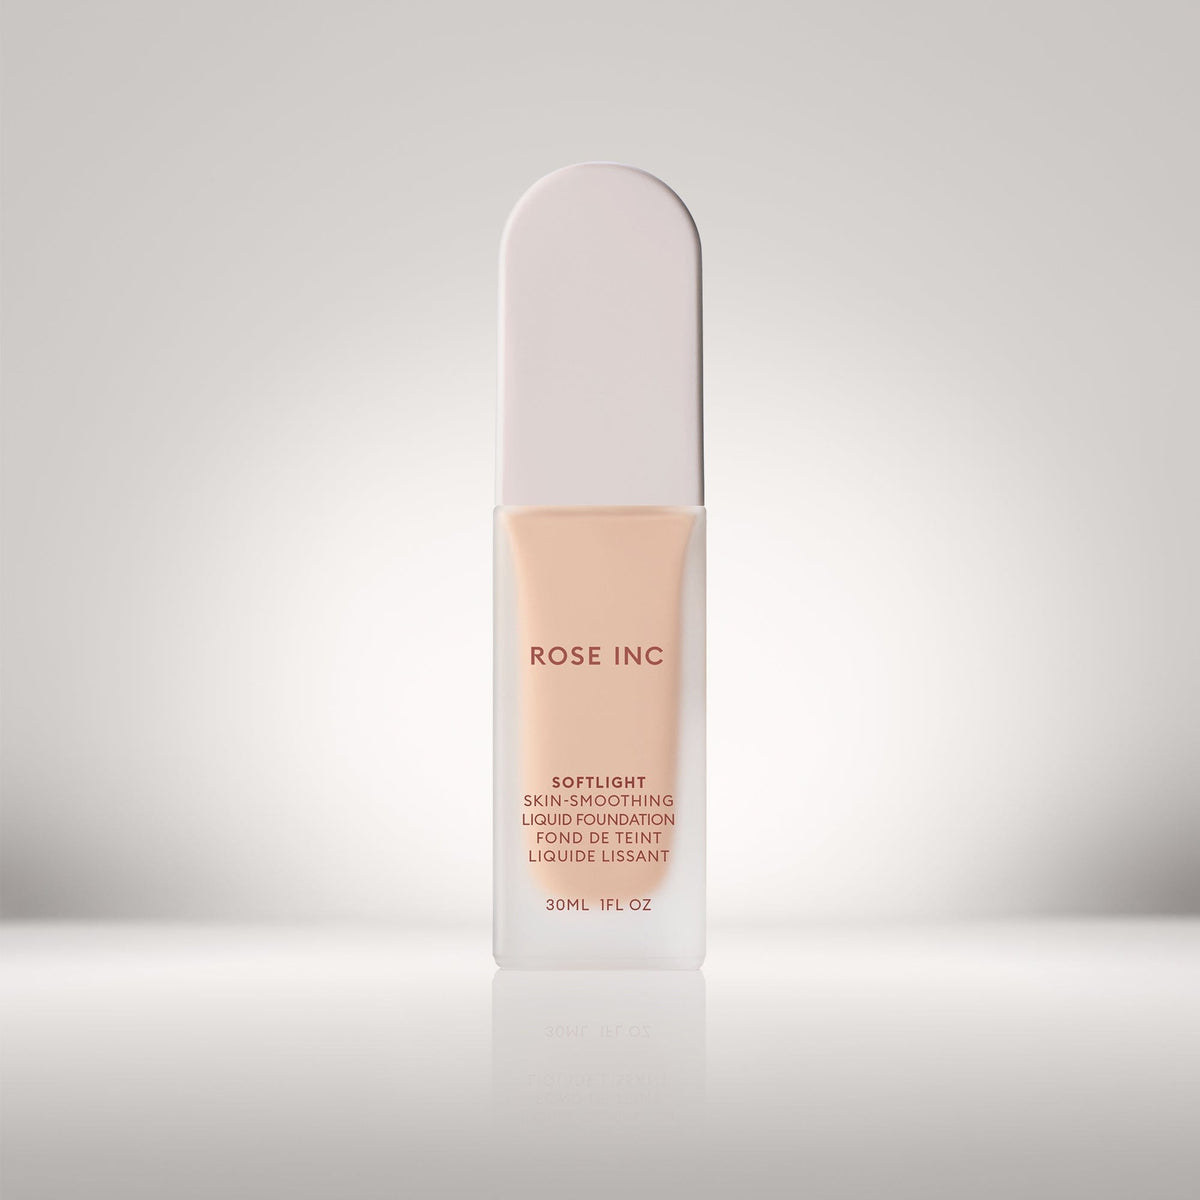 Soldier image of shade 8N in Softlight Smoothing Foundation